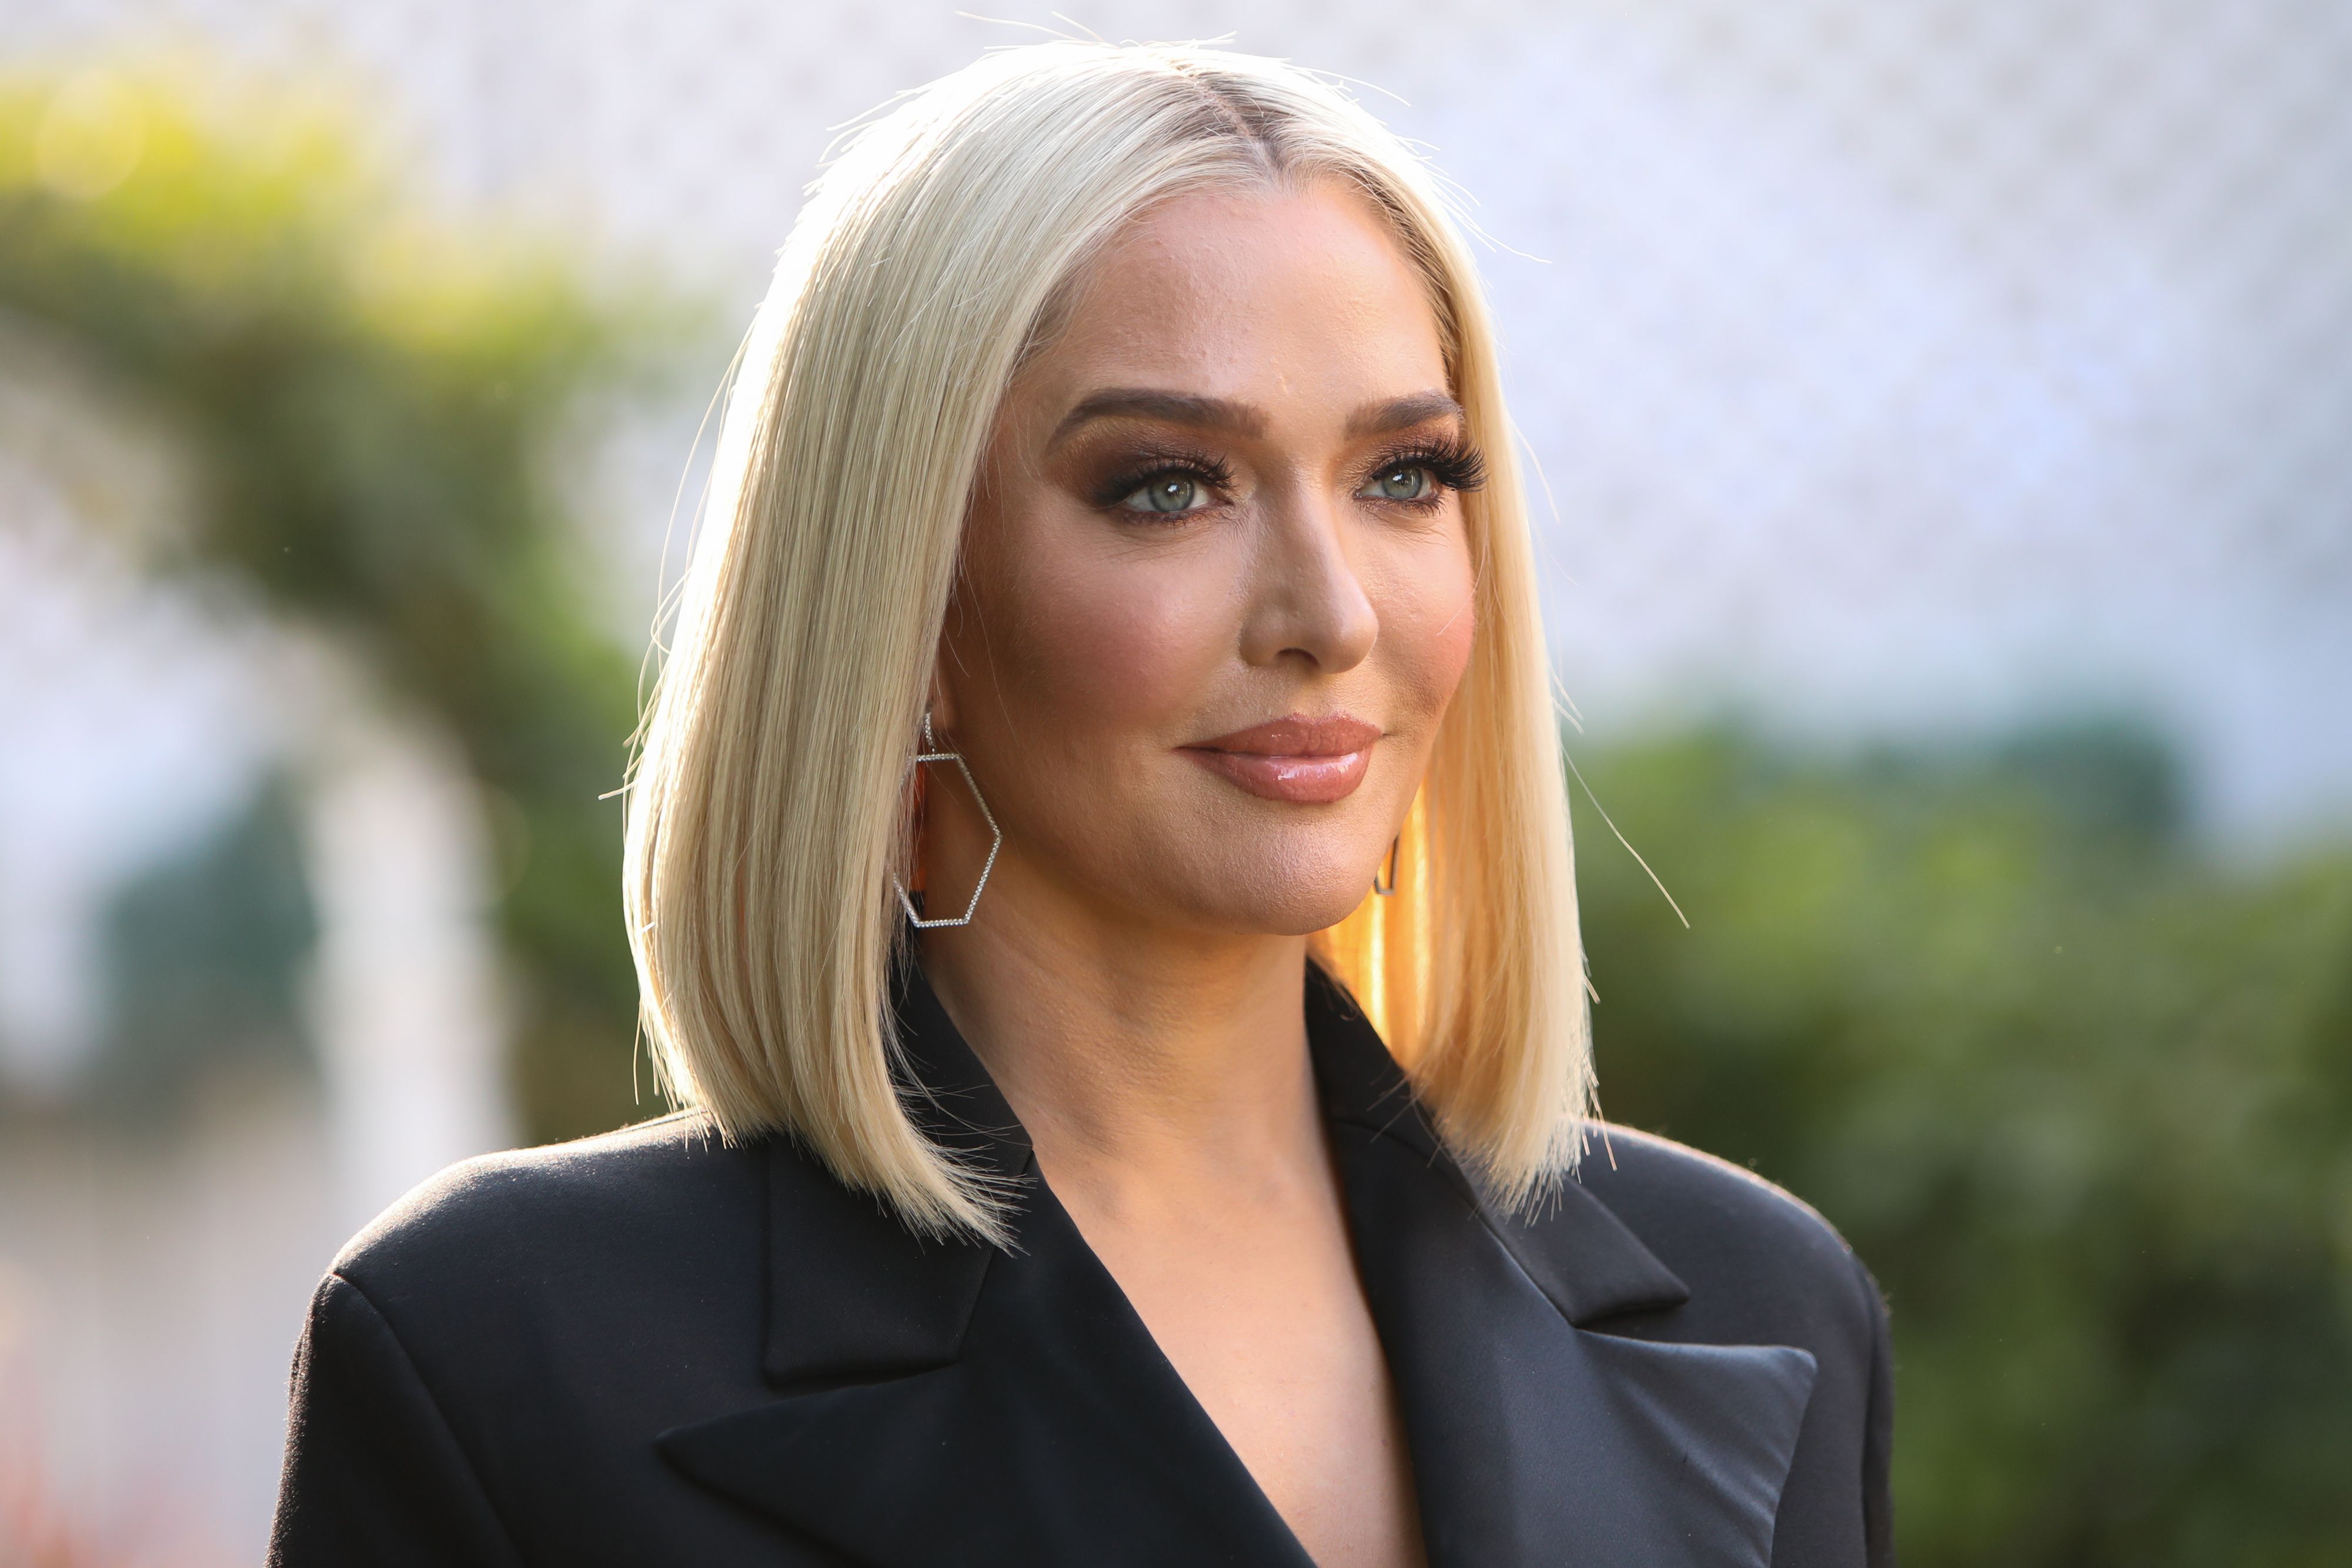 Erika Jayne drops by Hallmark Channel's "Home & Family" at Universal Studios Hollywood on November 11, 2019 in Universal City, California. | Source: Getty Images